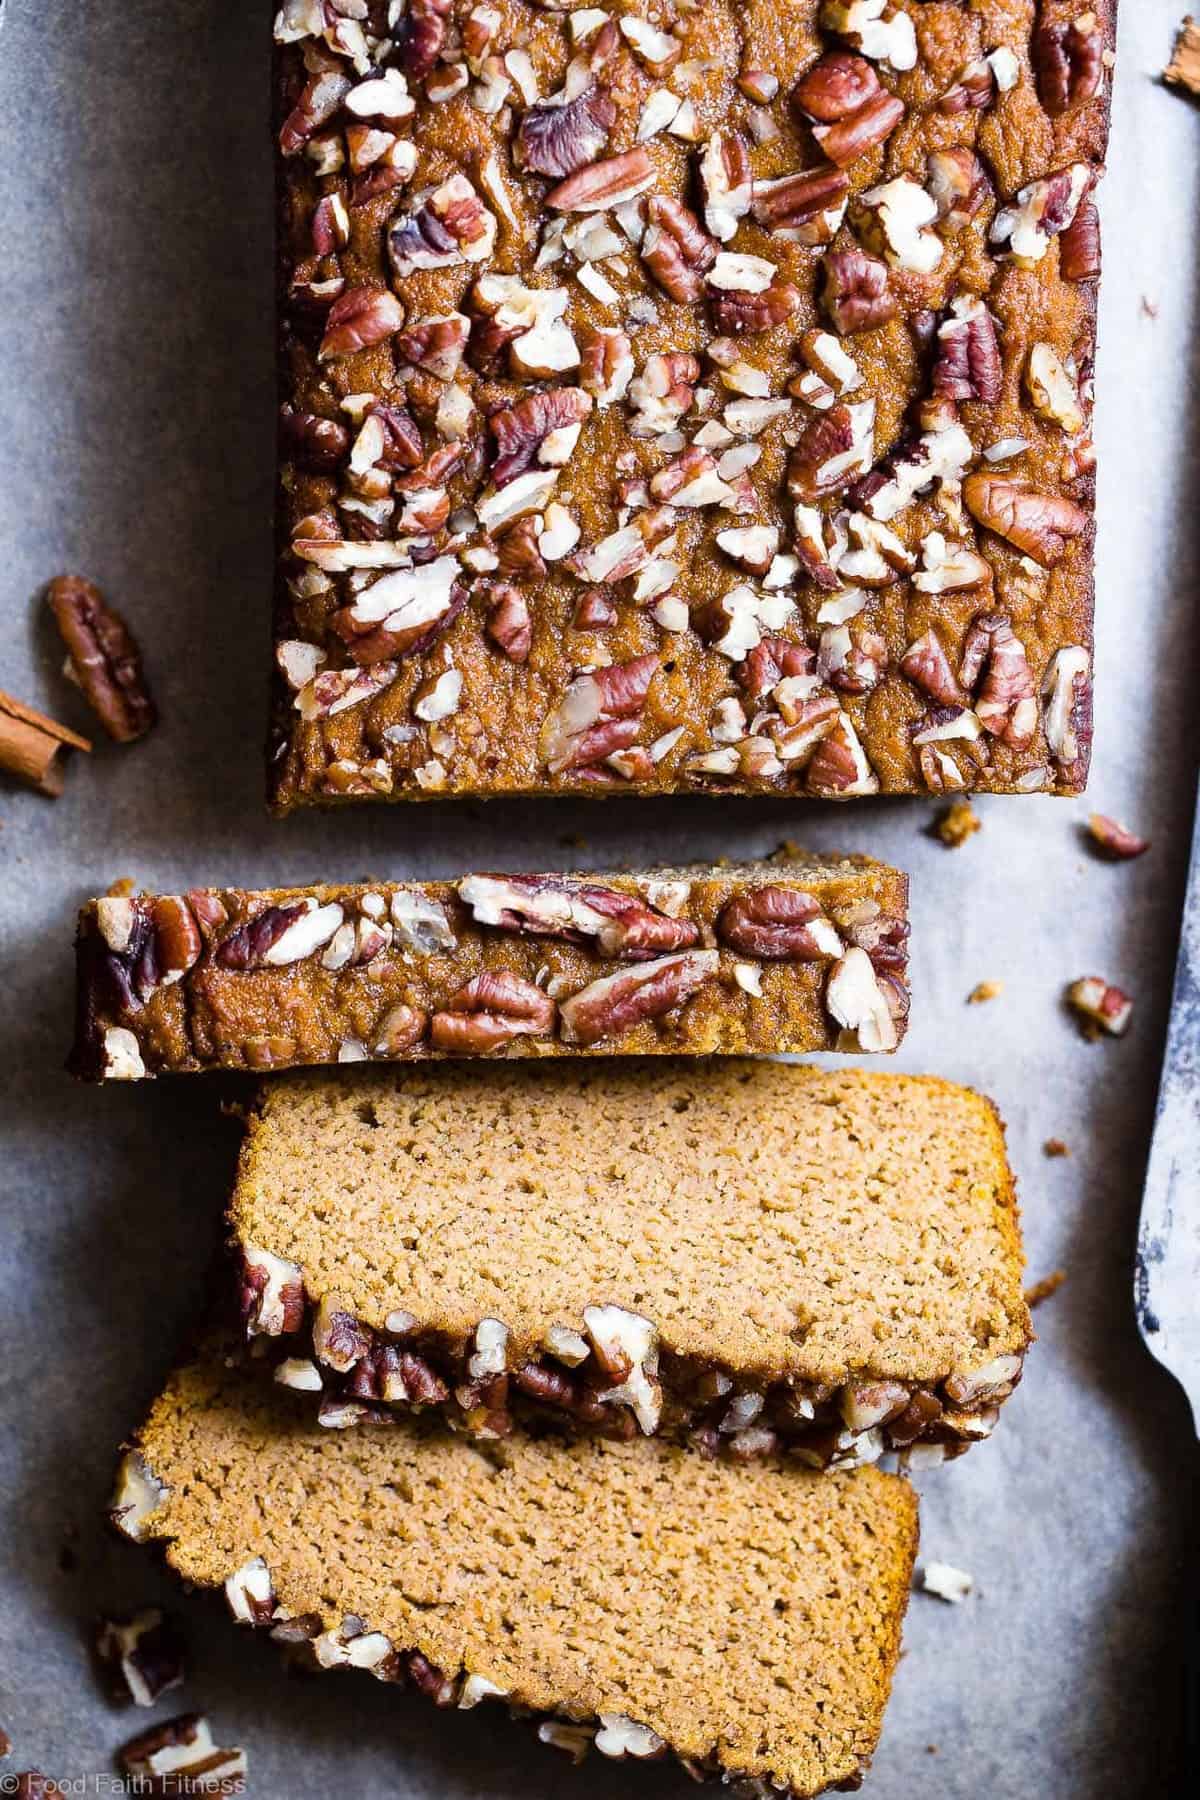 Gluten Free Paleo Pumpkin Bread - This EASY, healthy, dairy free pumpkin bread is SO moist, chewy and perfectly spicy-sweet! All the best parts of fall in a simple, wholesome recipe that is great for breakfasts or snacks! | #Foodfaithfitness | #Glutenfree #Paleo #Healthy #Grainfree #Pumpkin